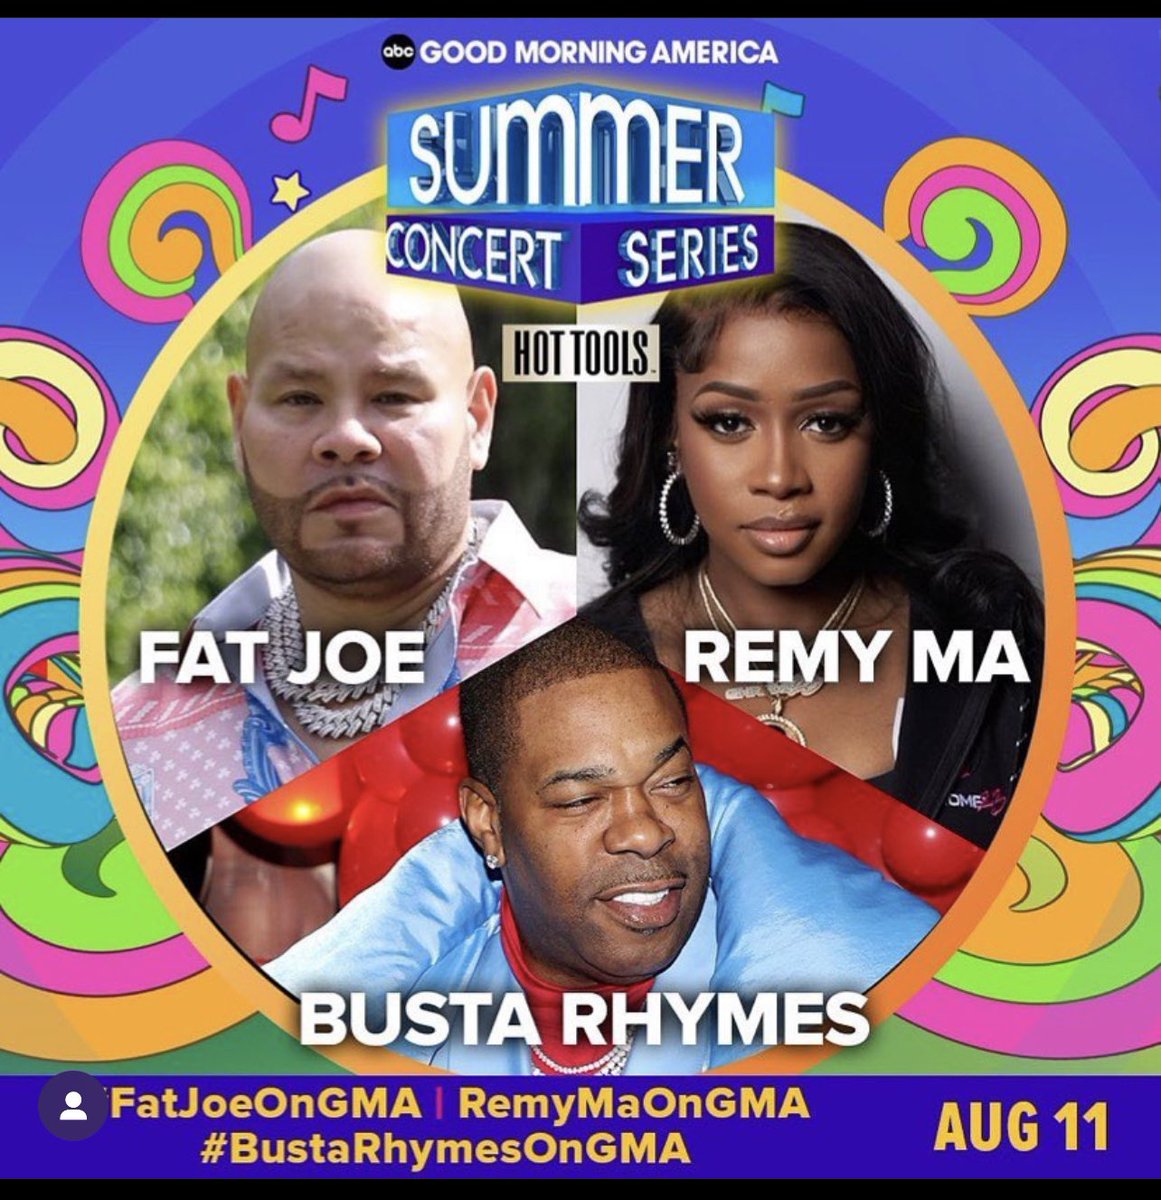 AUGUST 11: @gma will be celebrating the 50th anniversary of #HipHop with @fatjoe, @RealRemyMa & @BustaRhymes 

 GMA Summer Concert Series! gma.abc/3Q3Oogj #FatJoeOnGMA #RemyMaOnGMA #BustaRhymesOnGMA #remyma